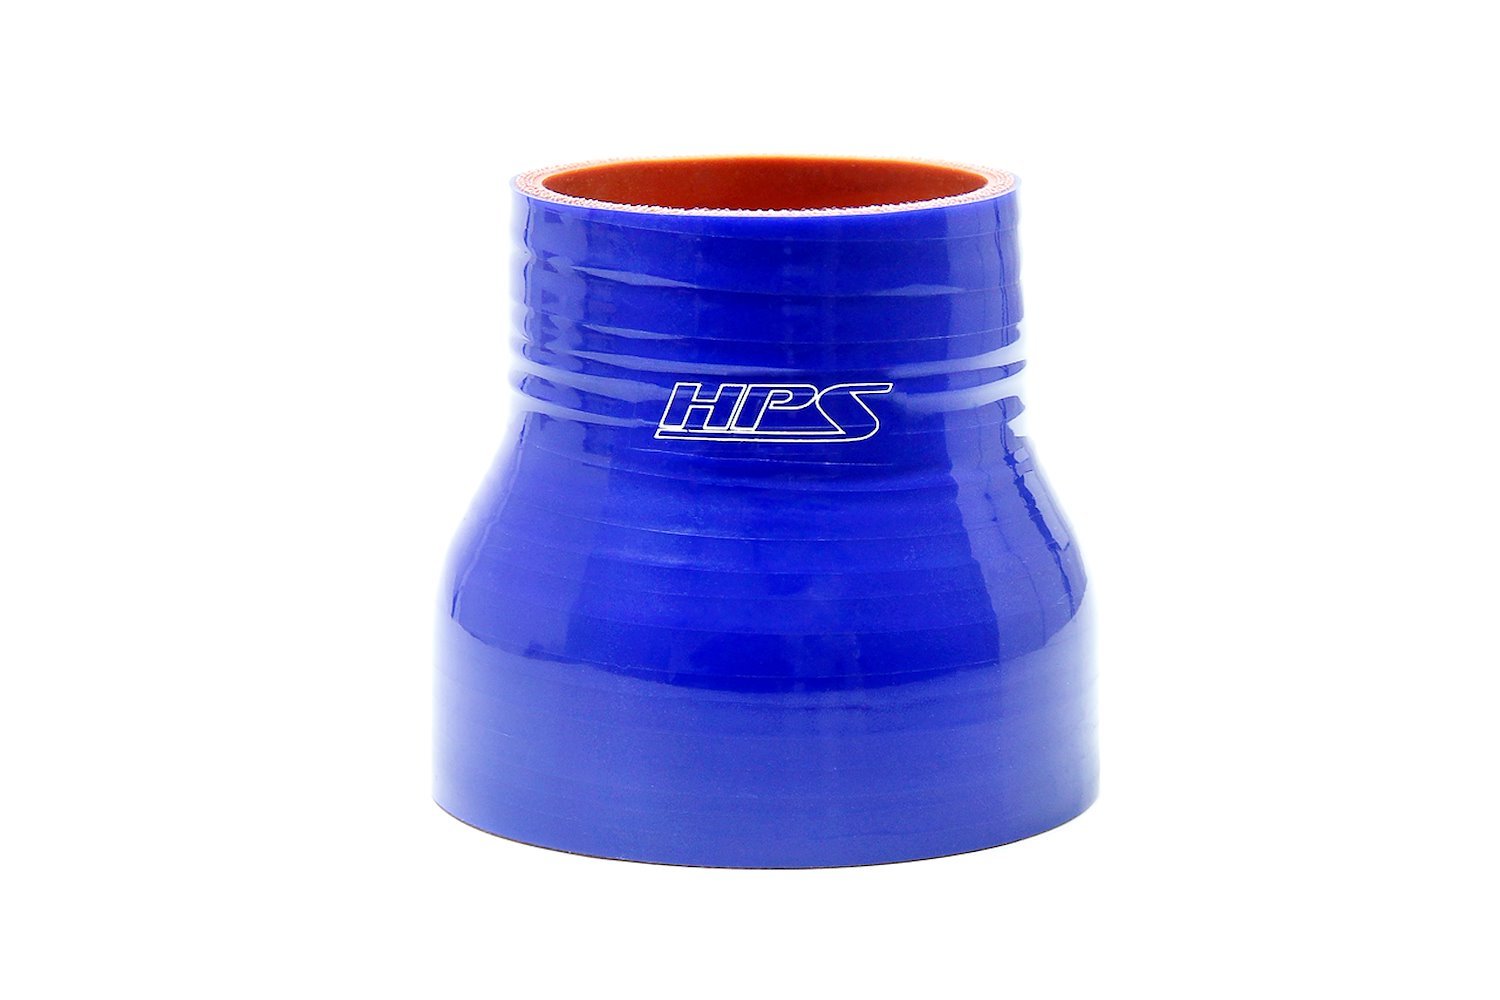 HTSR-175-250-L4-BLUE Silicone Reducer Hose, High-Temp 4-Ply Reinforced, 1-3/4 in. - 2-1/2 in. ID, 4 in. Long, Blue